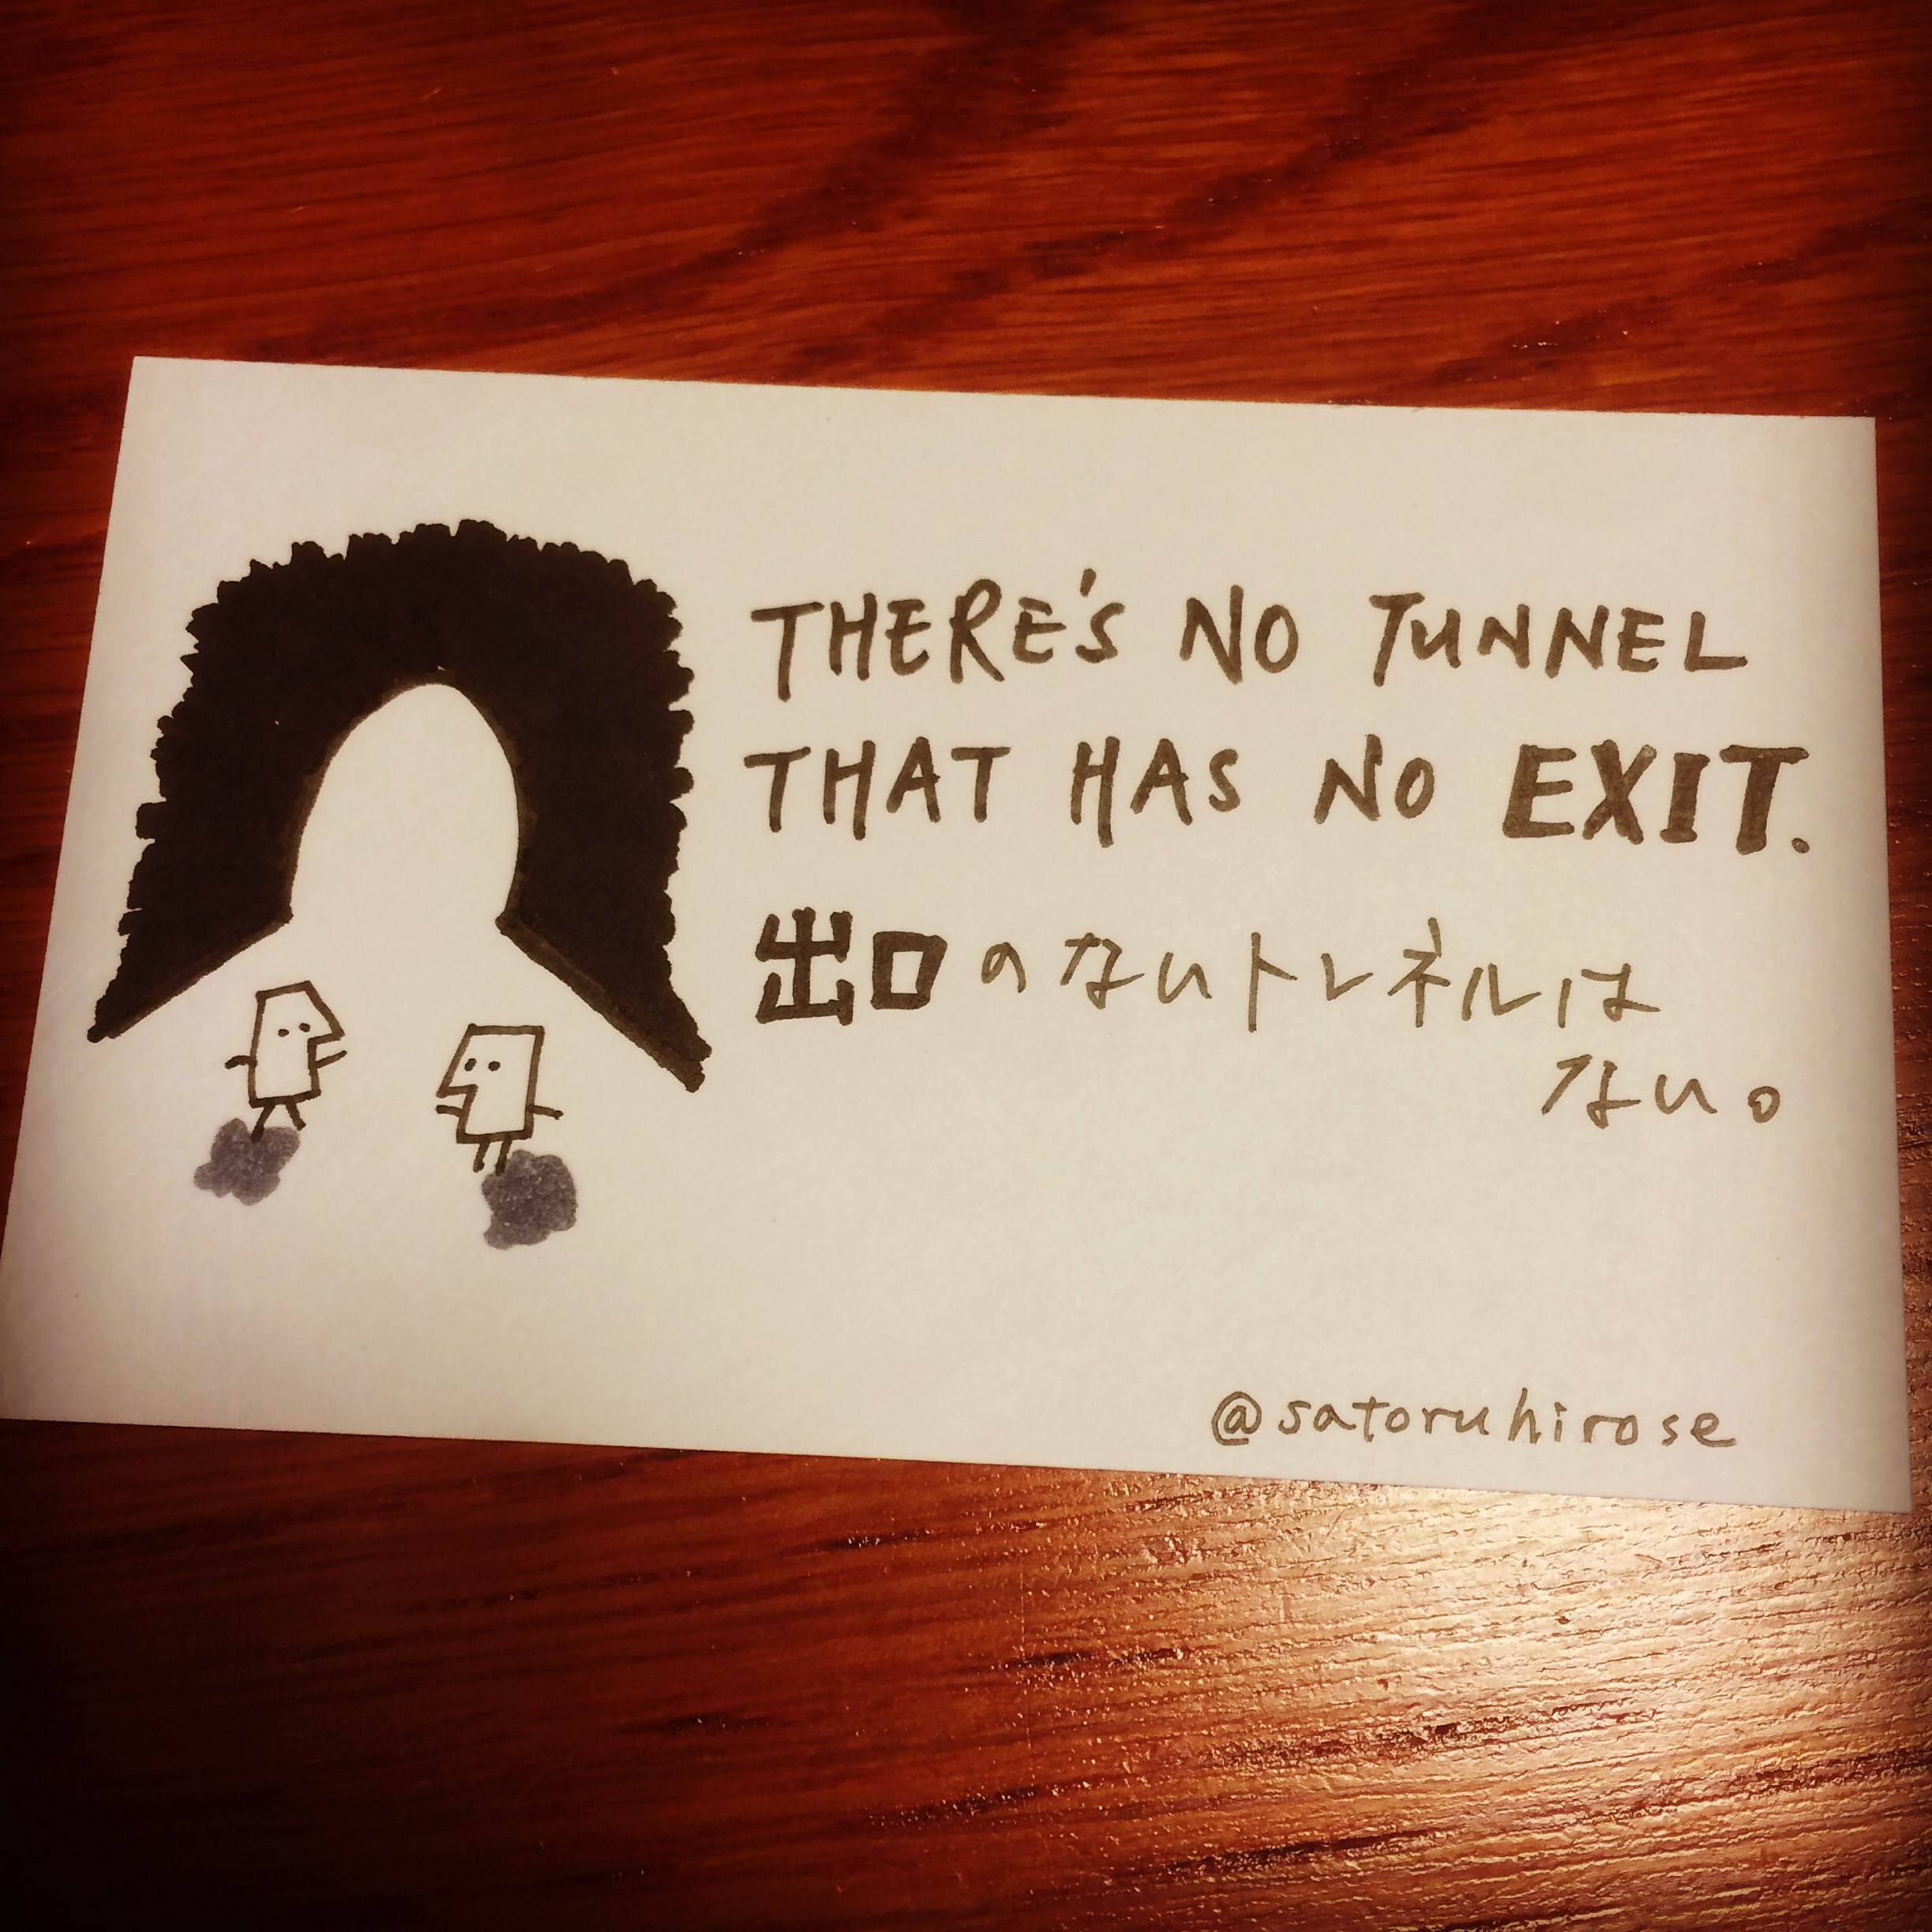 There's no tunnel that has no exit.